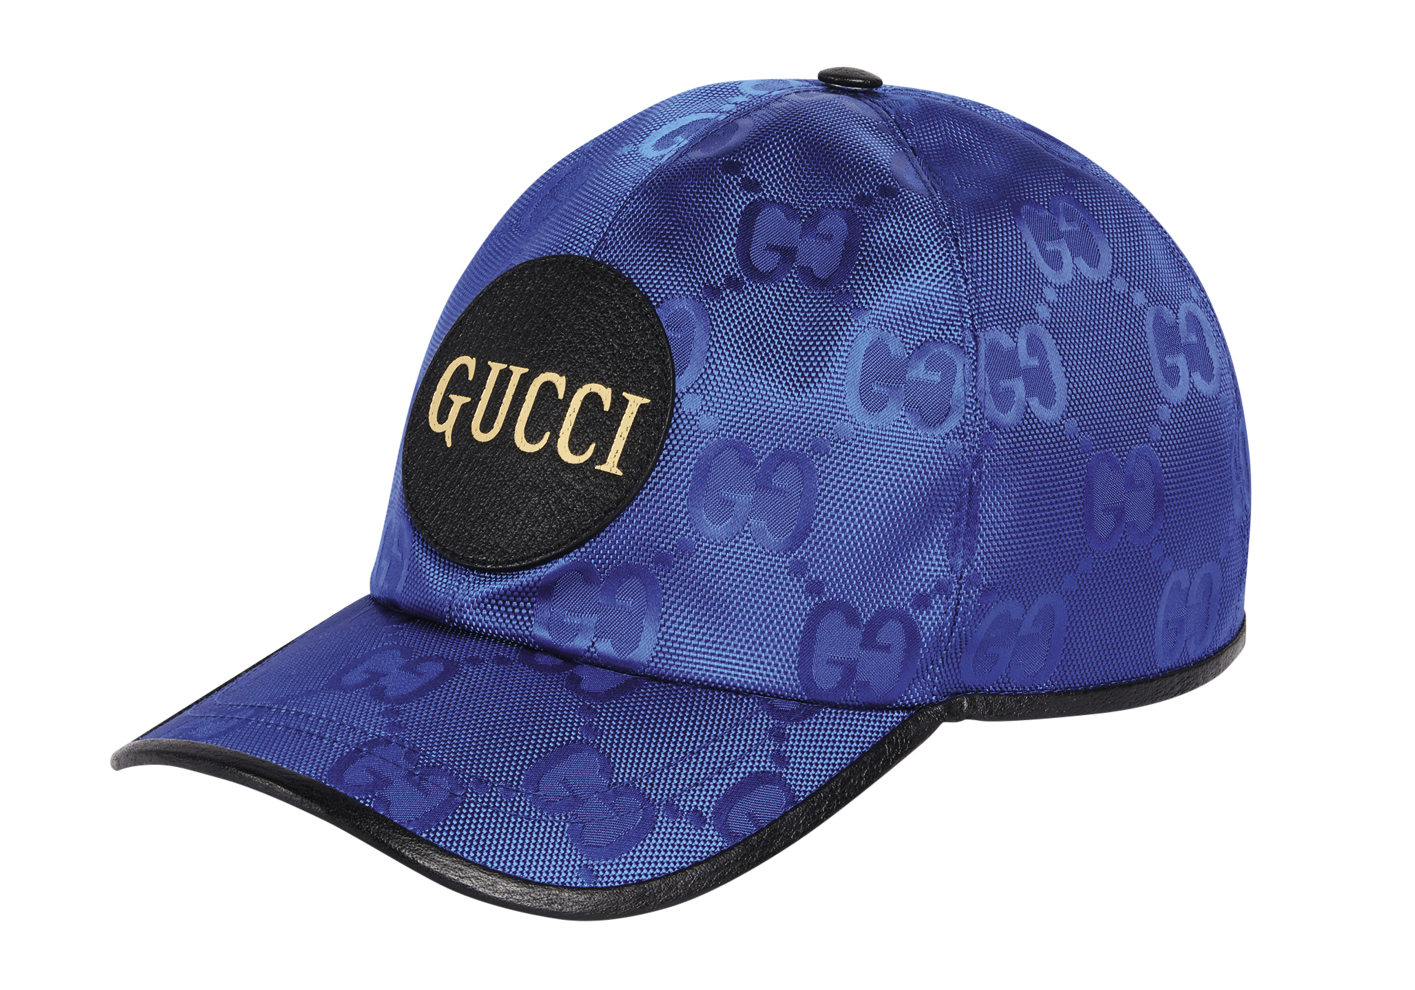 Gucci's new collection uses regenerated nylon. Hat, £260